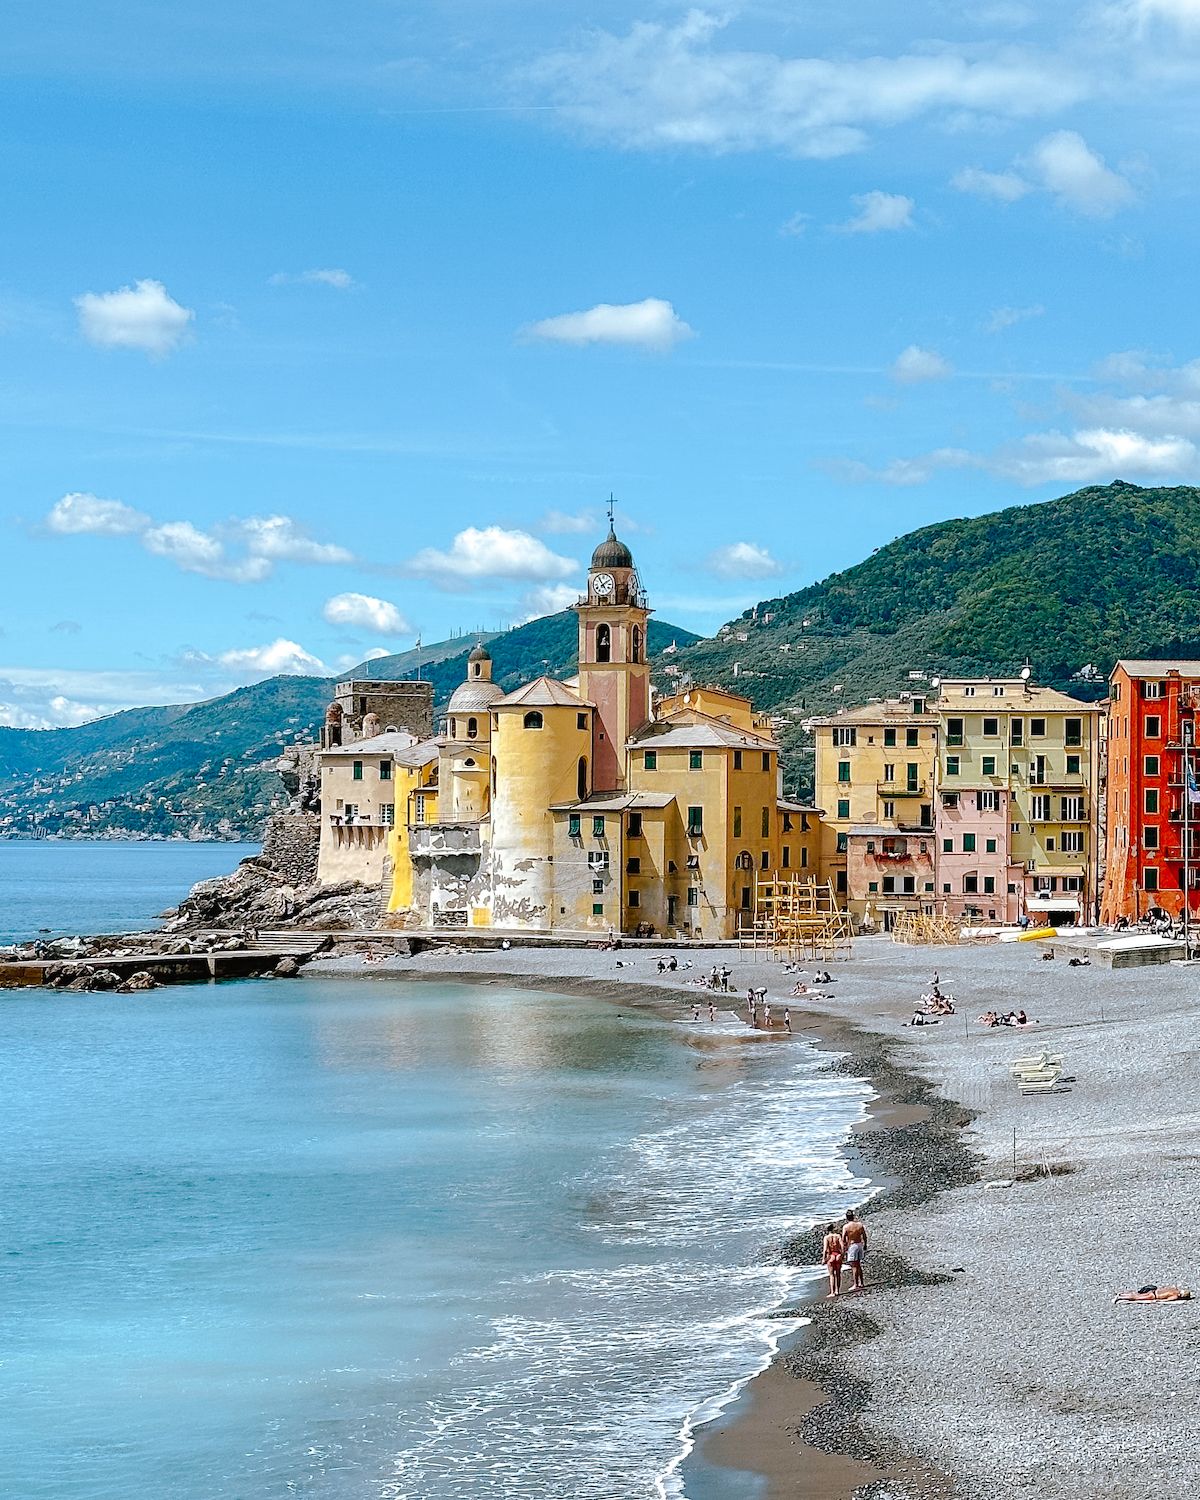 People walking and relaxing on the beach in Camogli